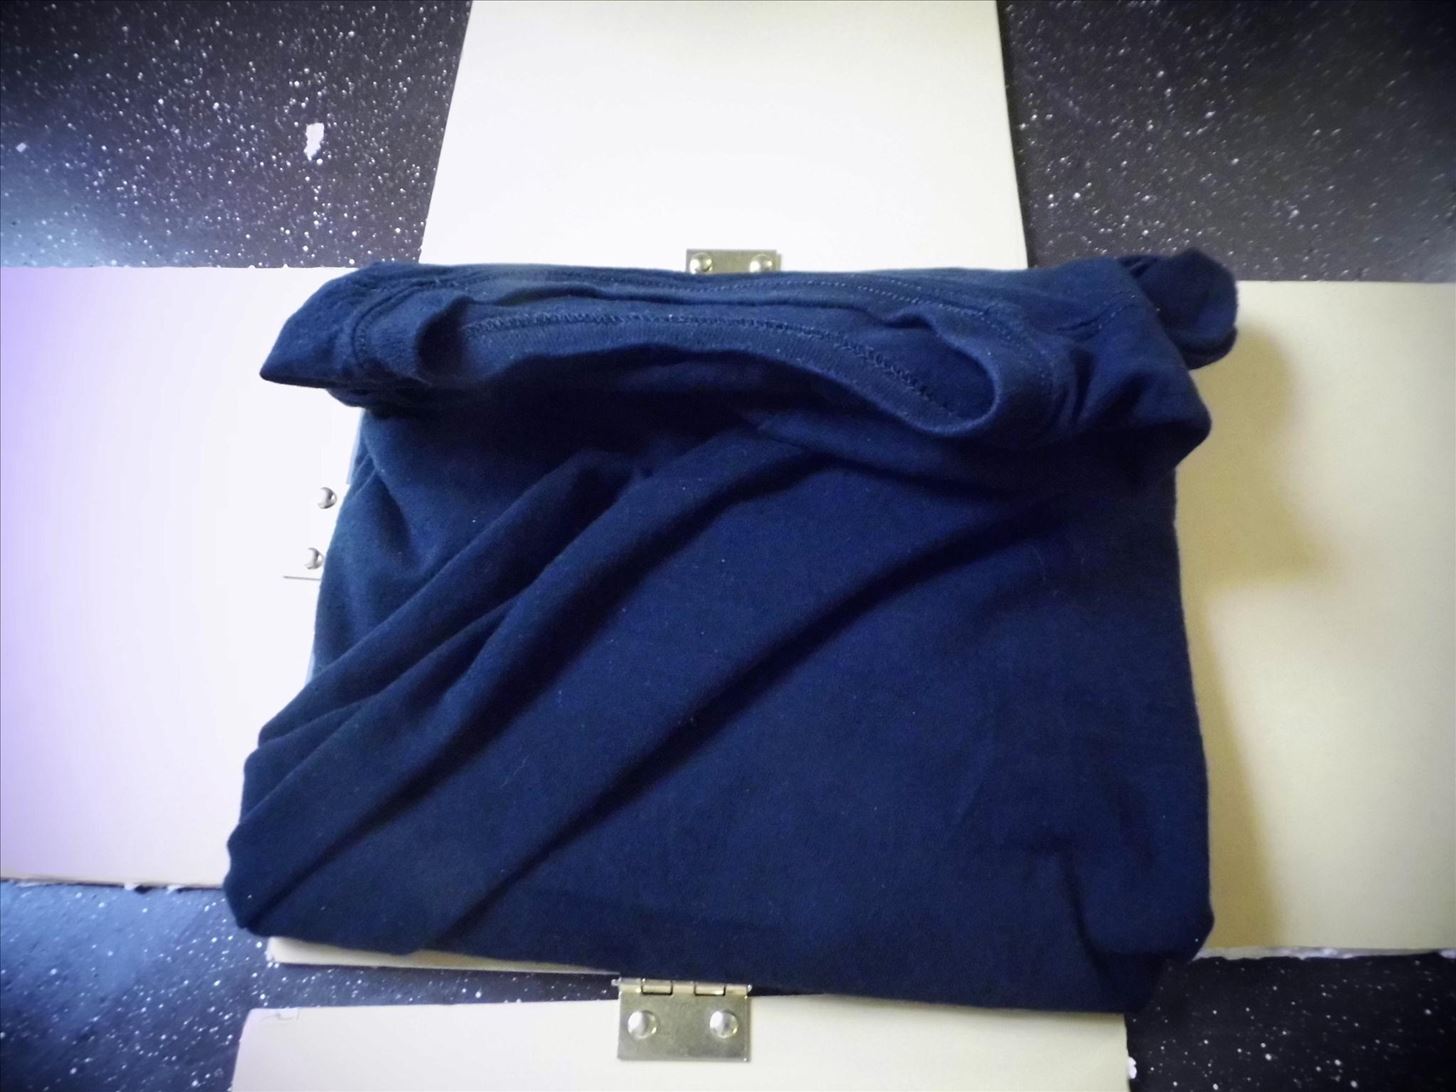 Hassle-Free Shirt Folding in Seconds with This DIY Clothes Folder